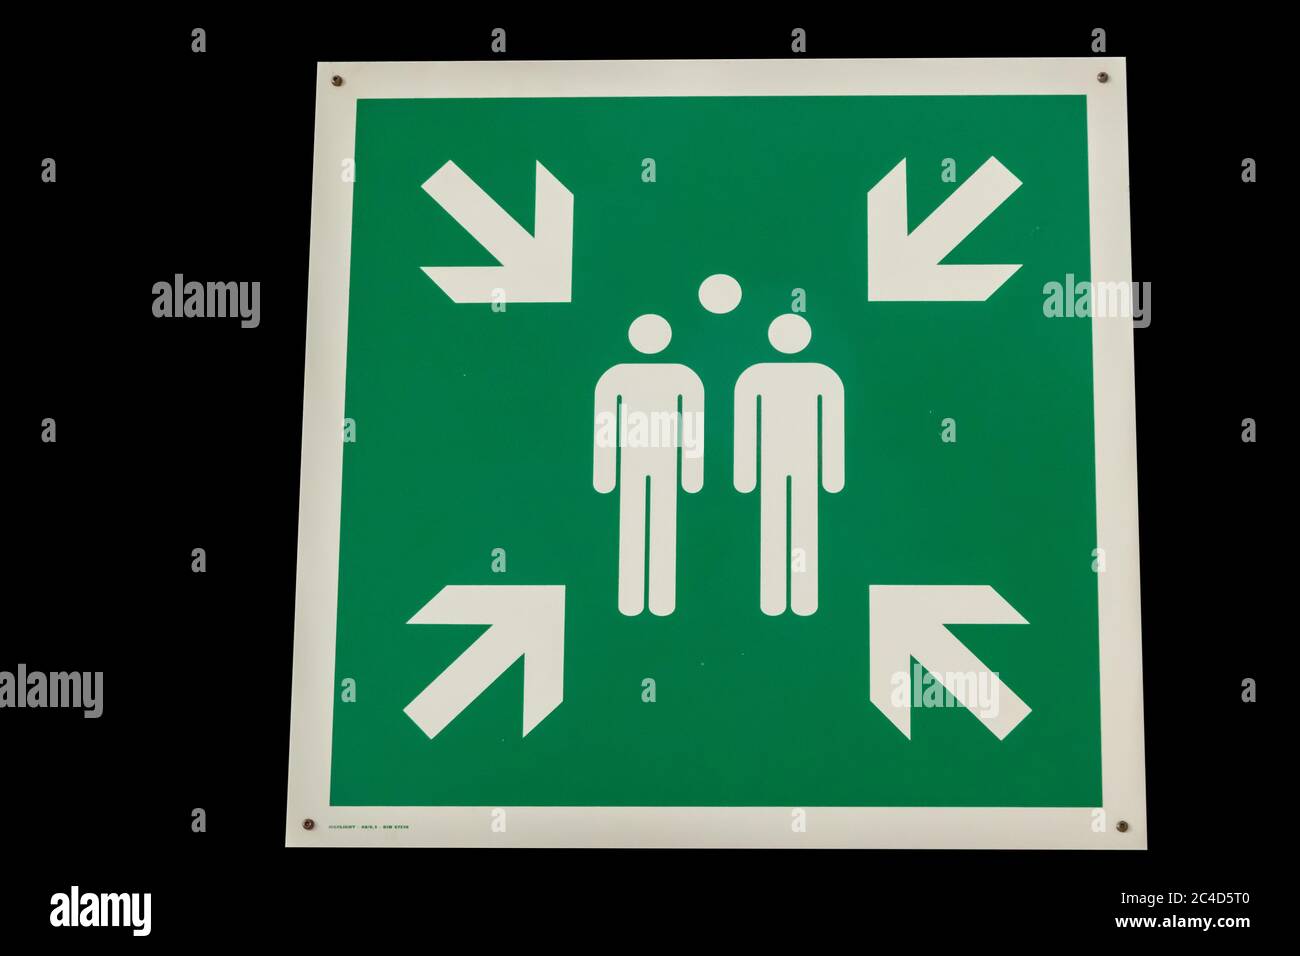 KRAUSNICK, GERMANY - Nov 01, 2020: A green rectangular sign for a collection point in case of an emergency in case of fire or disaster, placed in the Stock Photo